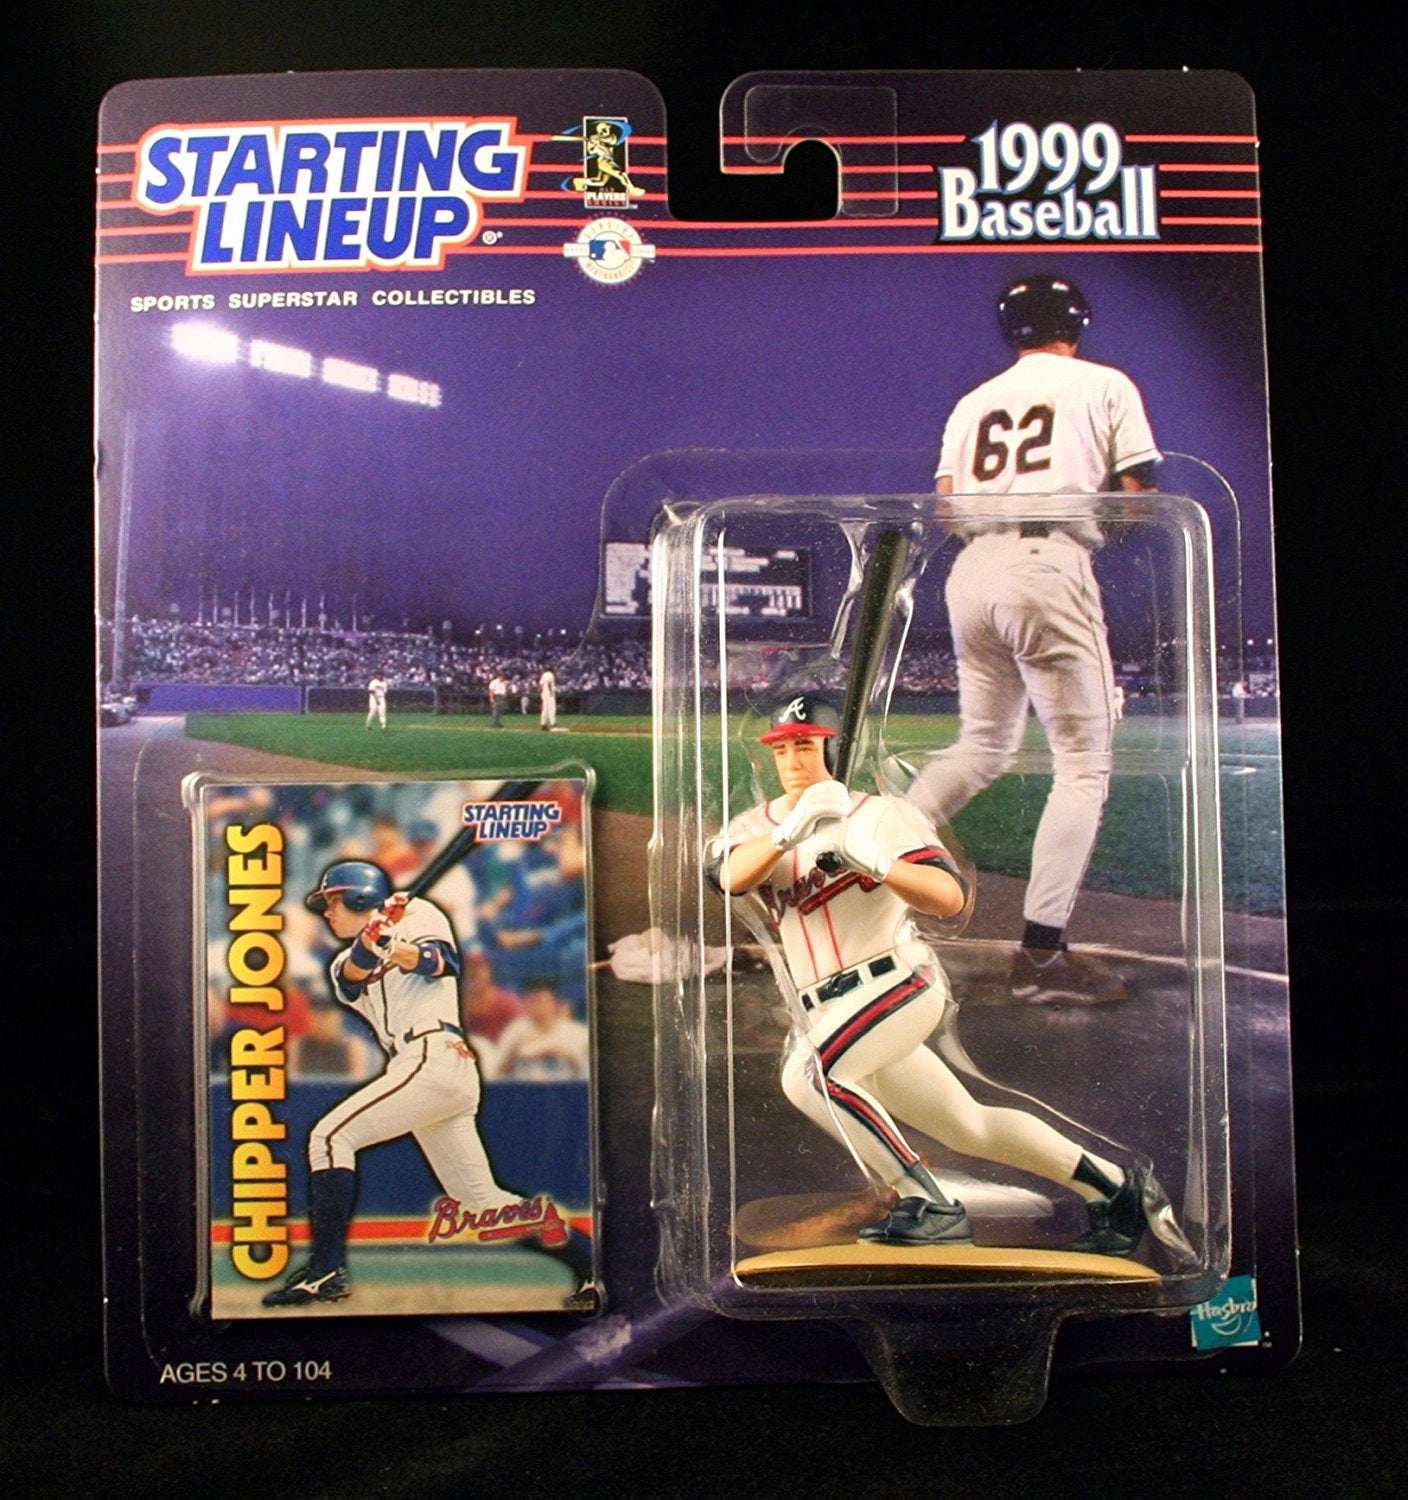 CHIPPER JONES / ATLANTA BRAVES 1999 MLB Starting Lineup Action Figure & Exclusive Collector Trading Card